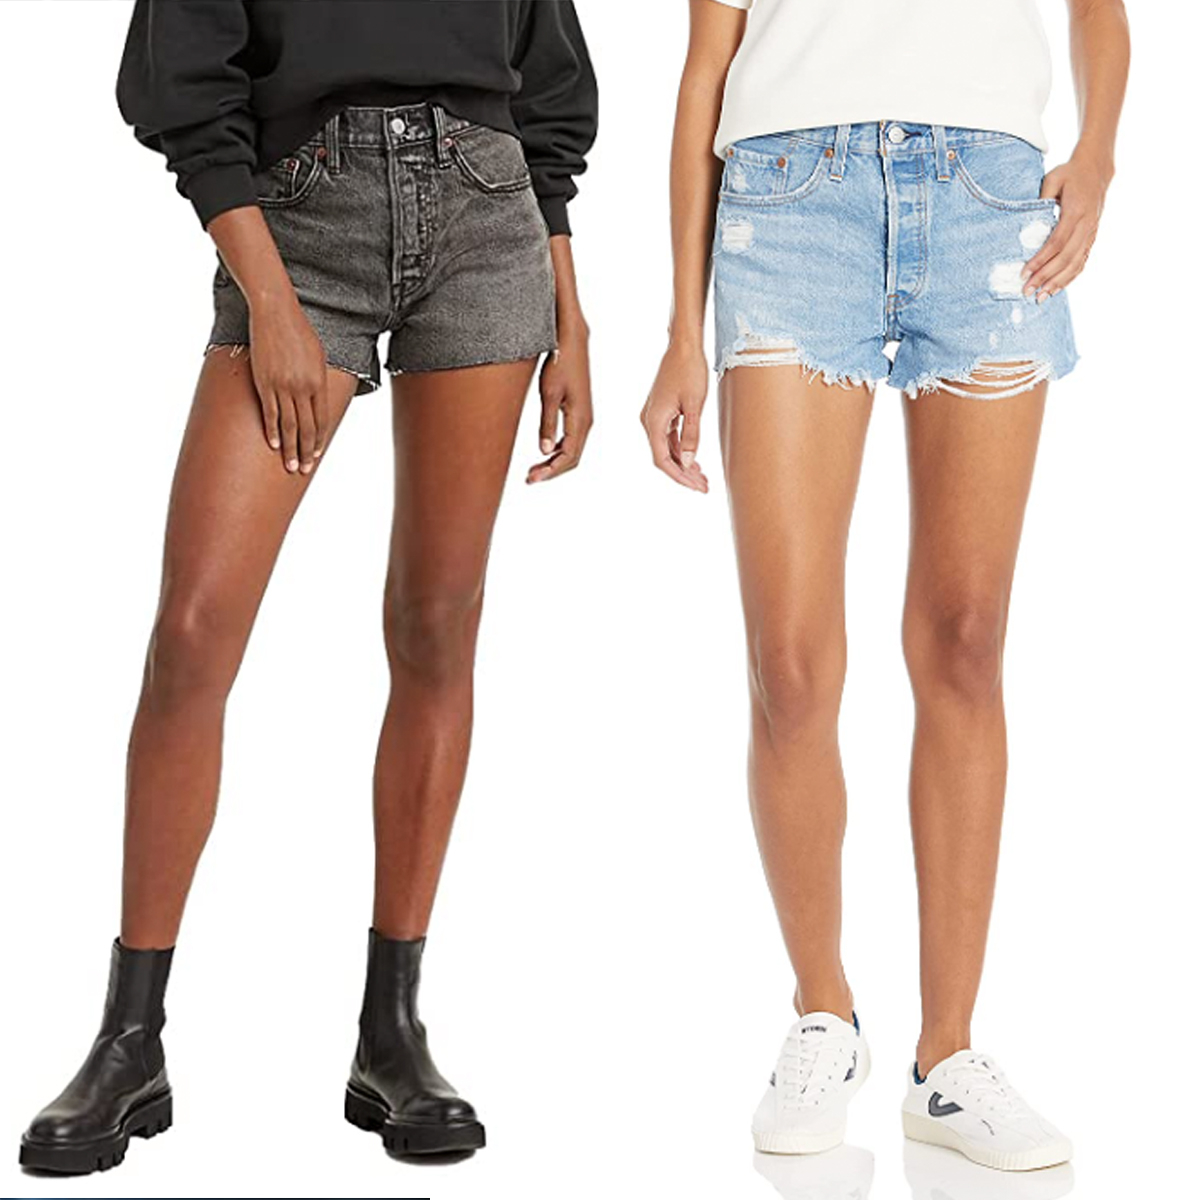 These $25 Levi's Shorts Have Over 11,000 5-Star Amazon Reviews - E! Online